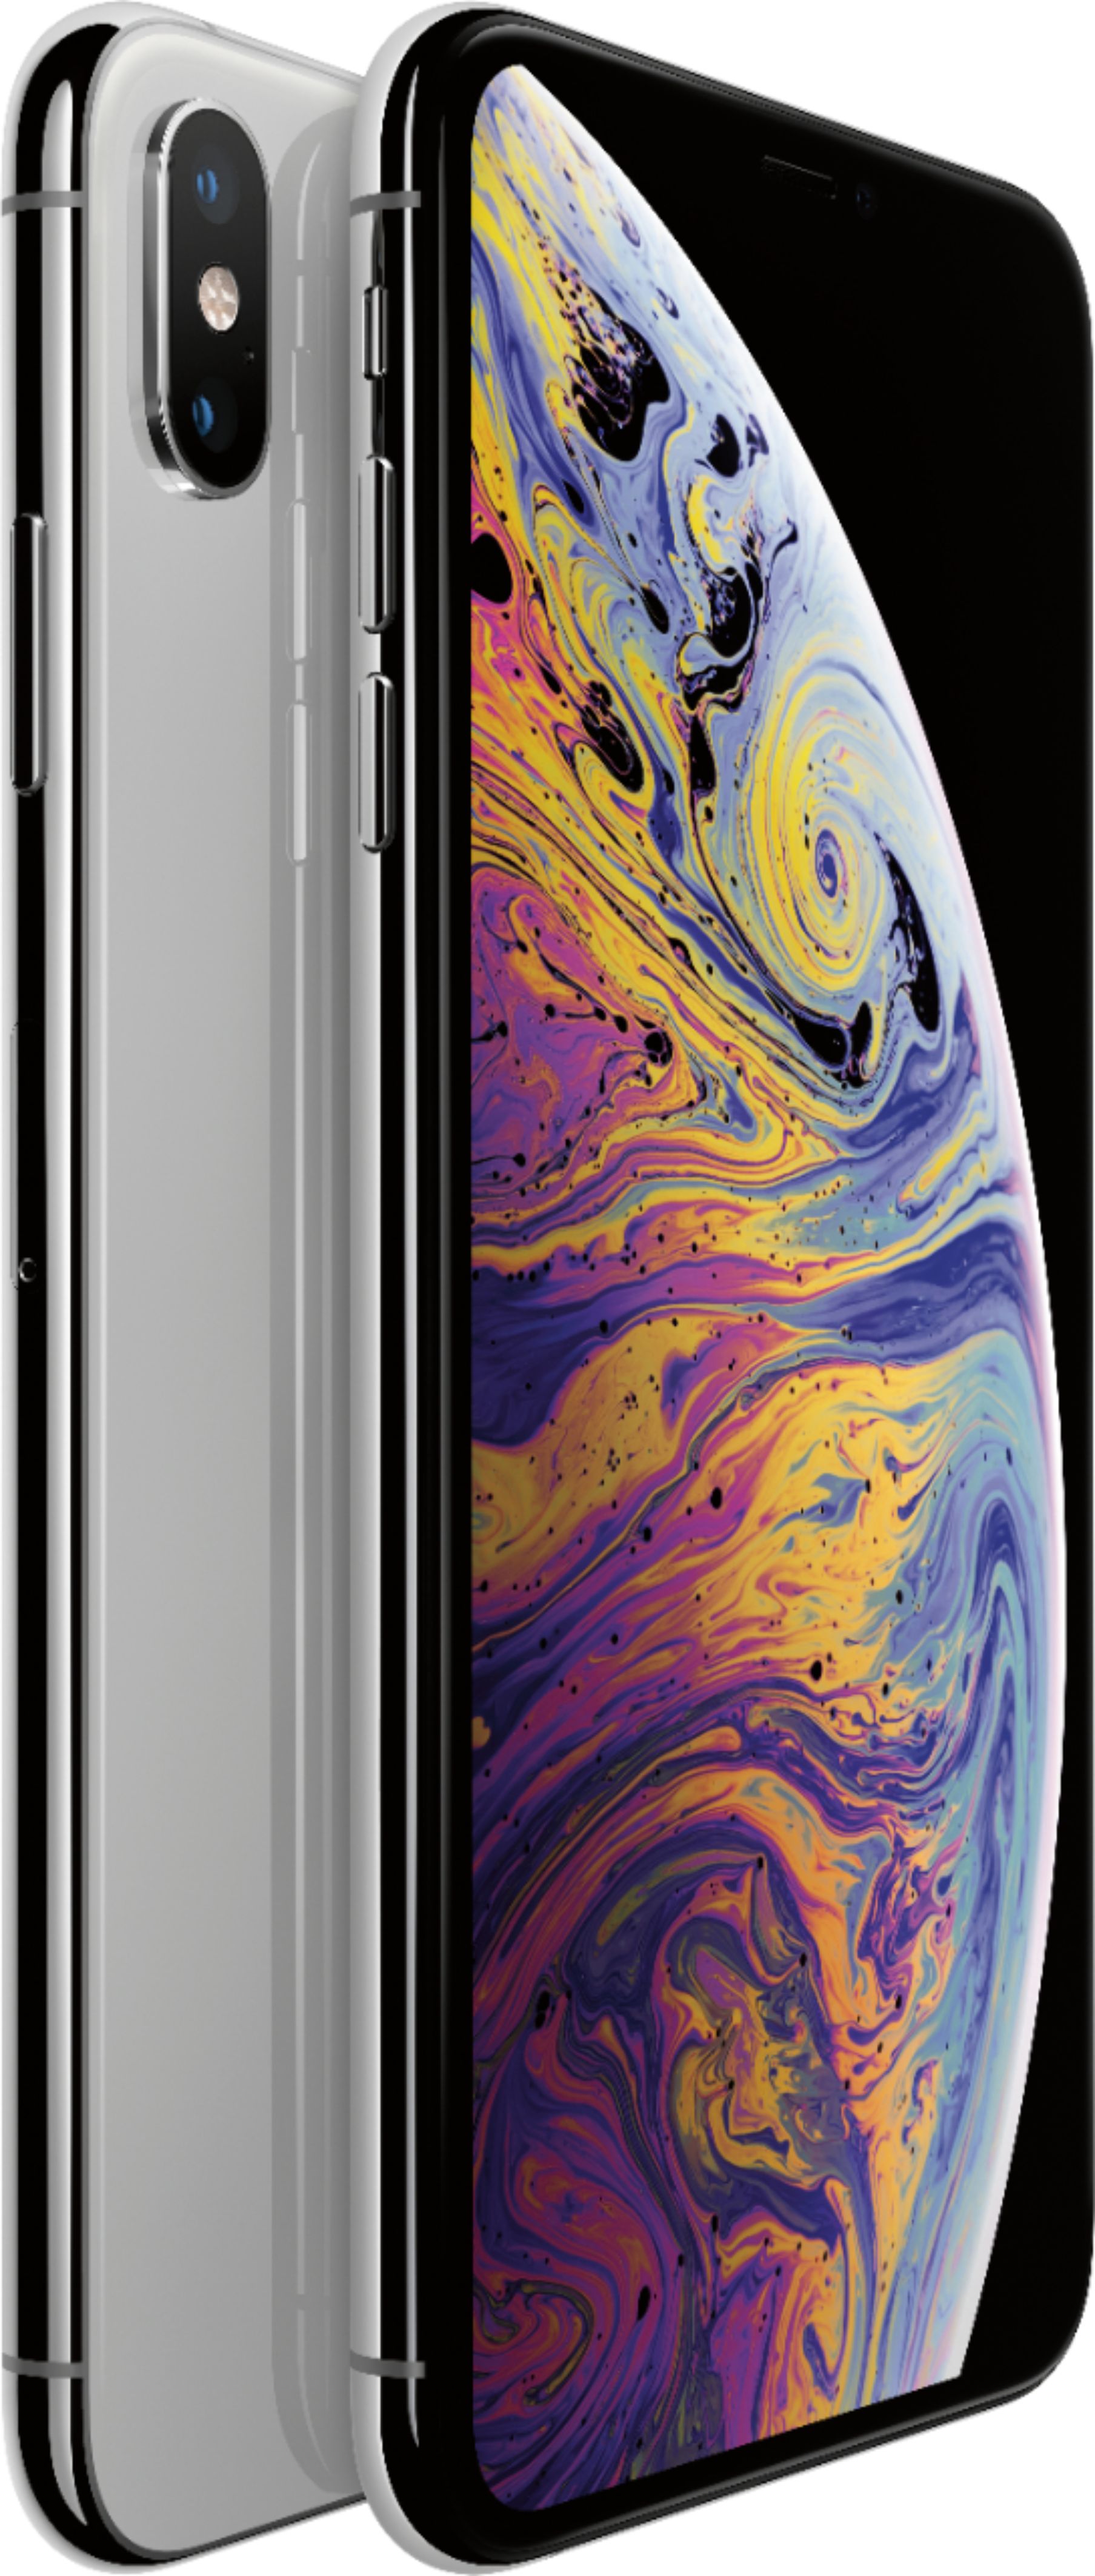 Apple Iphone Xs Max 64gb Silver At T Mt5a2ll A Best Buy